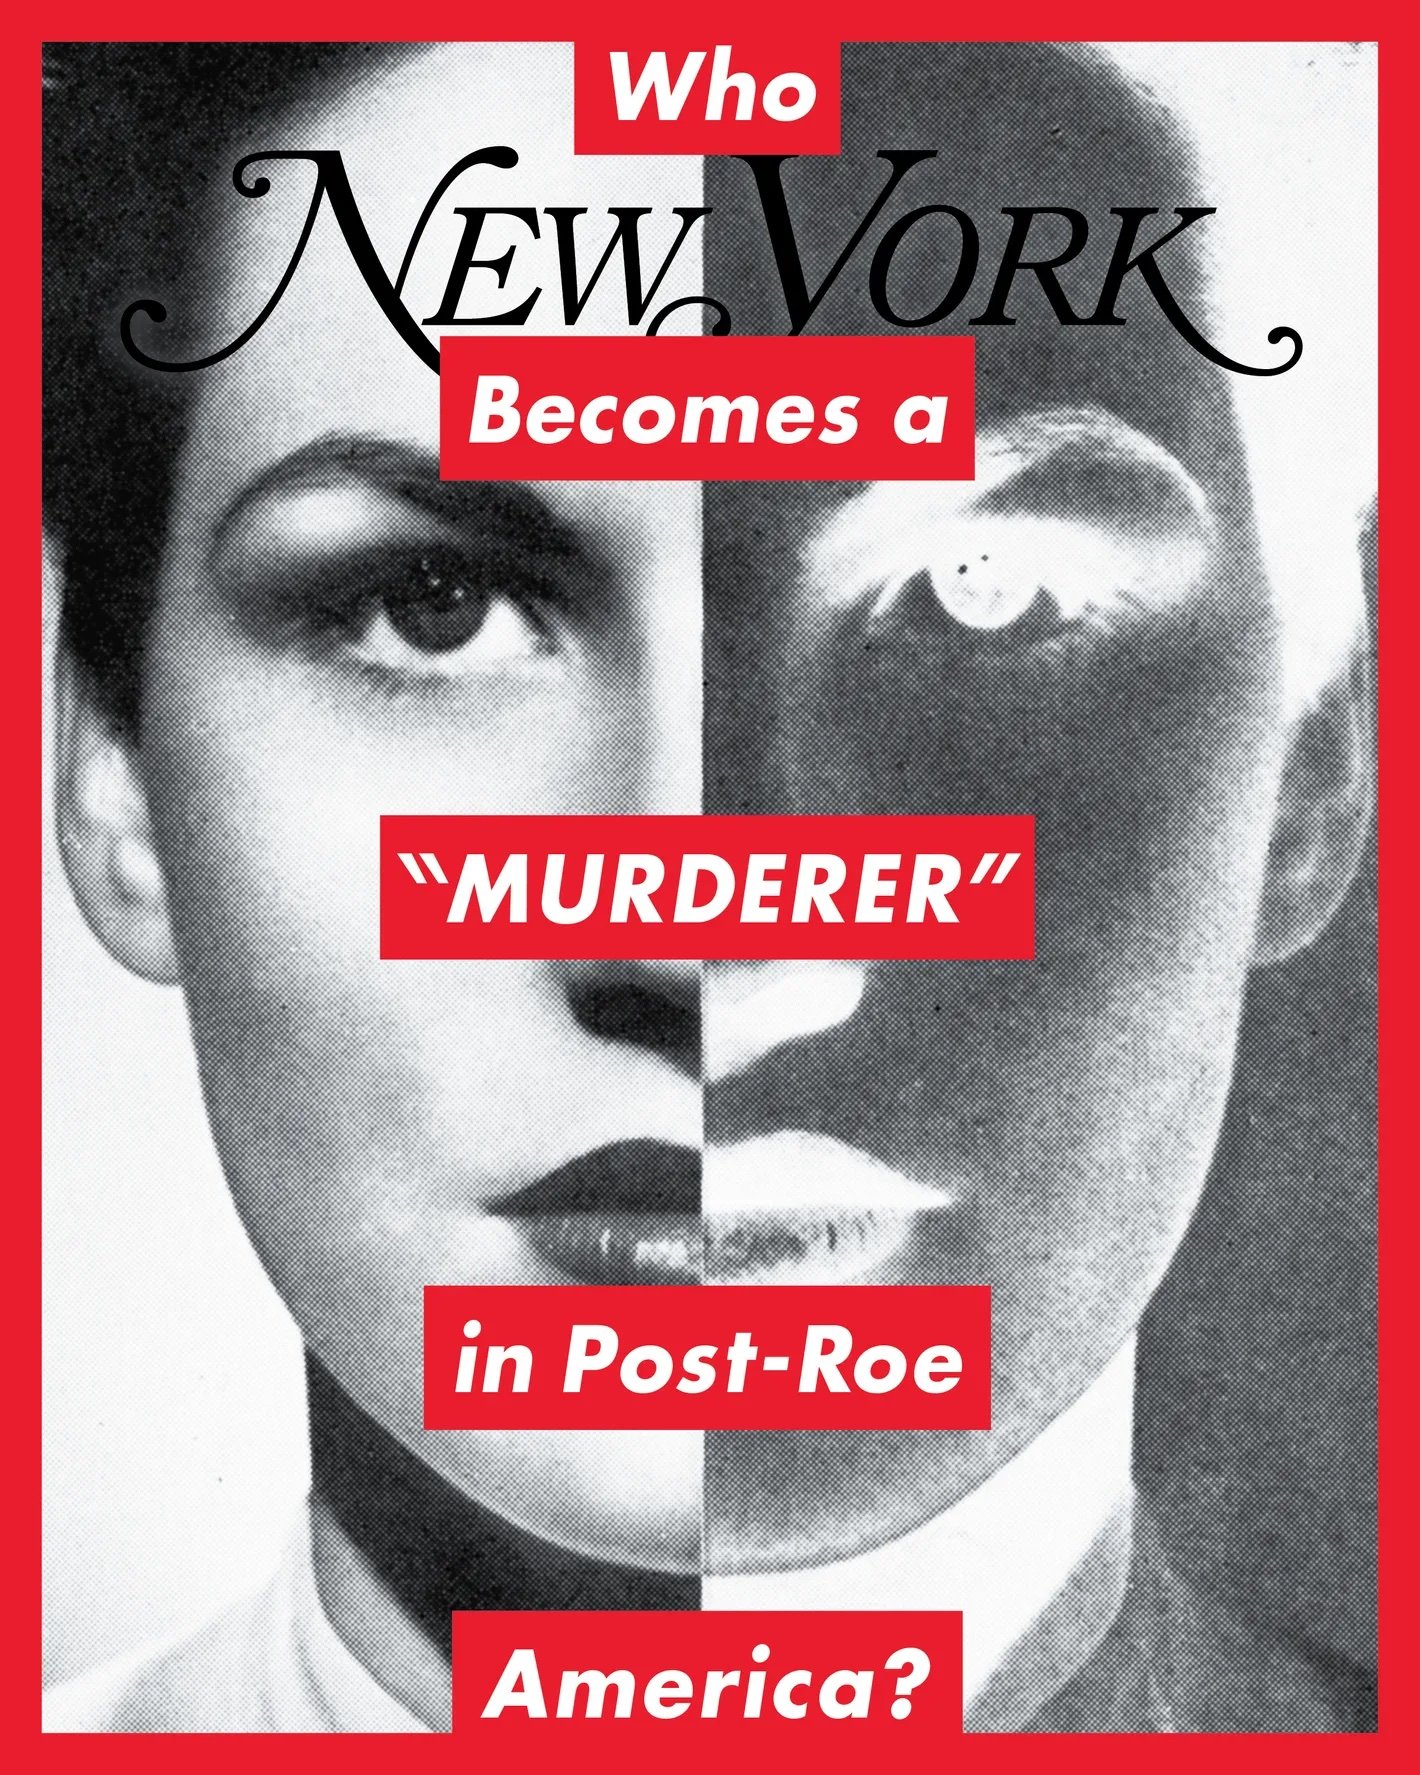 I Think About When Barbara Kruger Dragged Supreme a Lot